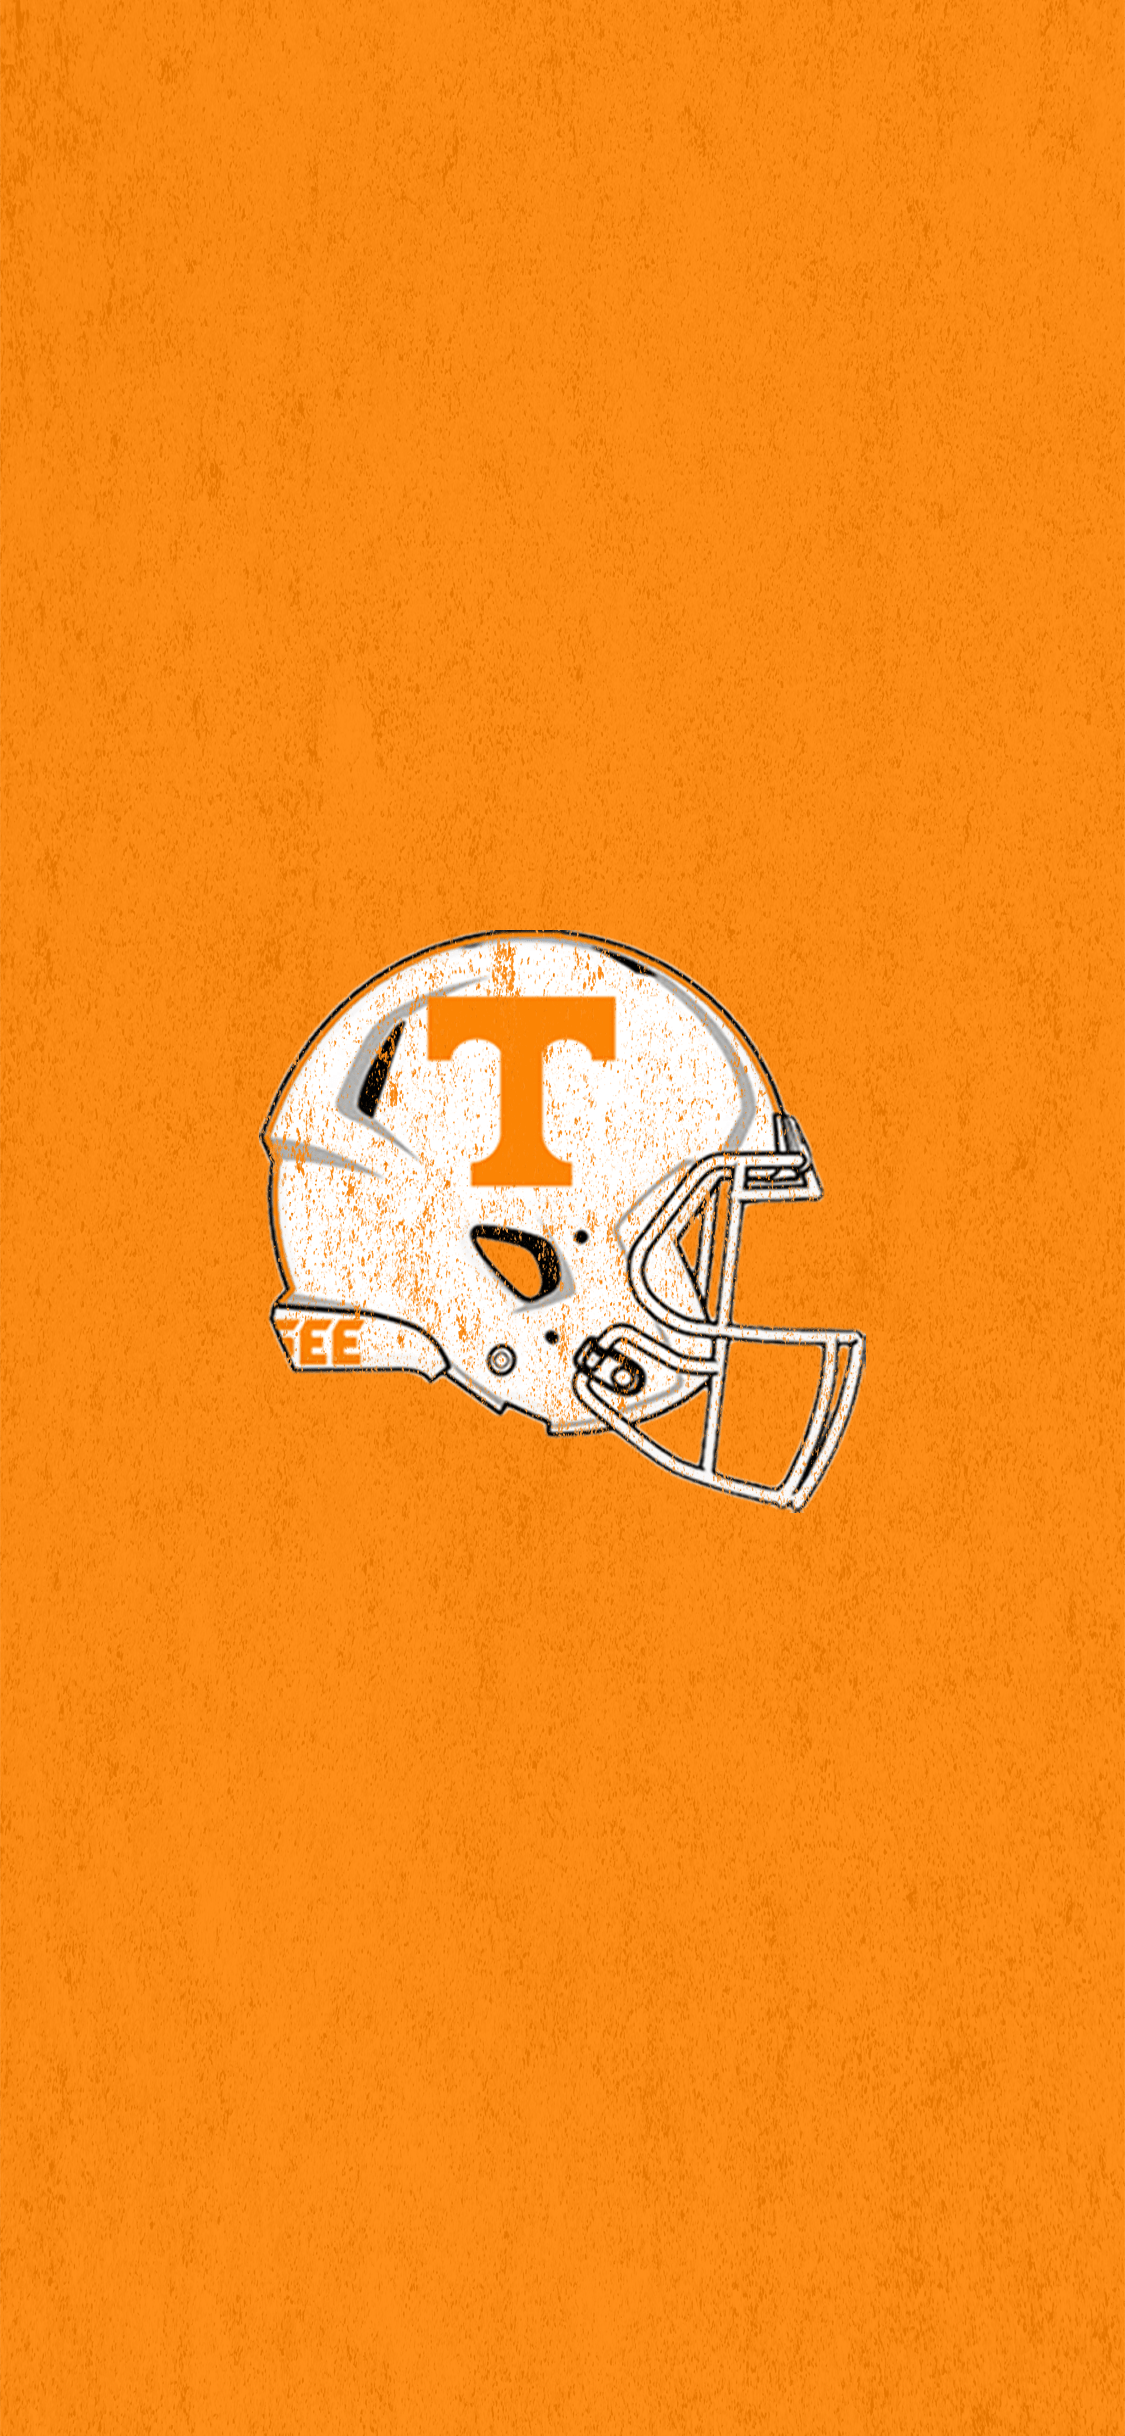 Tennessee Football on X  WallpaperWednesday httpstcoH3nGTXG8yC   X